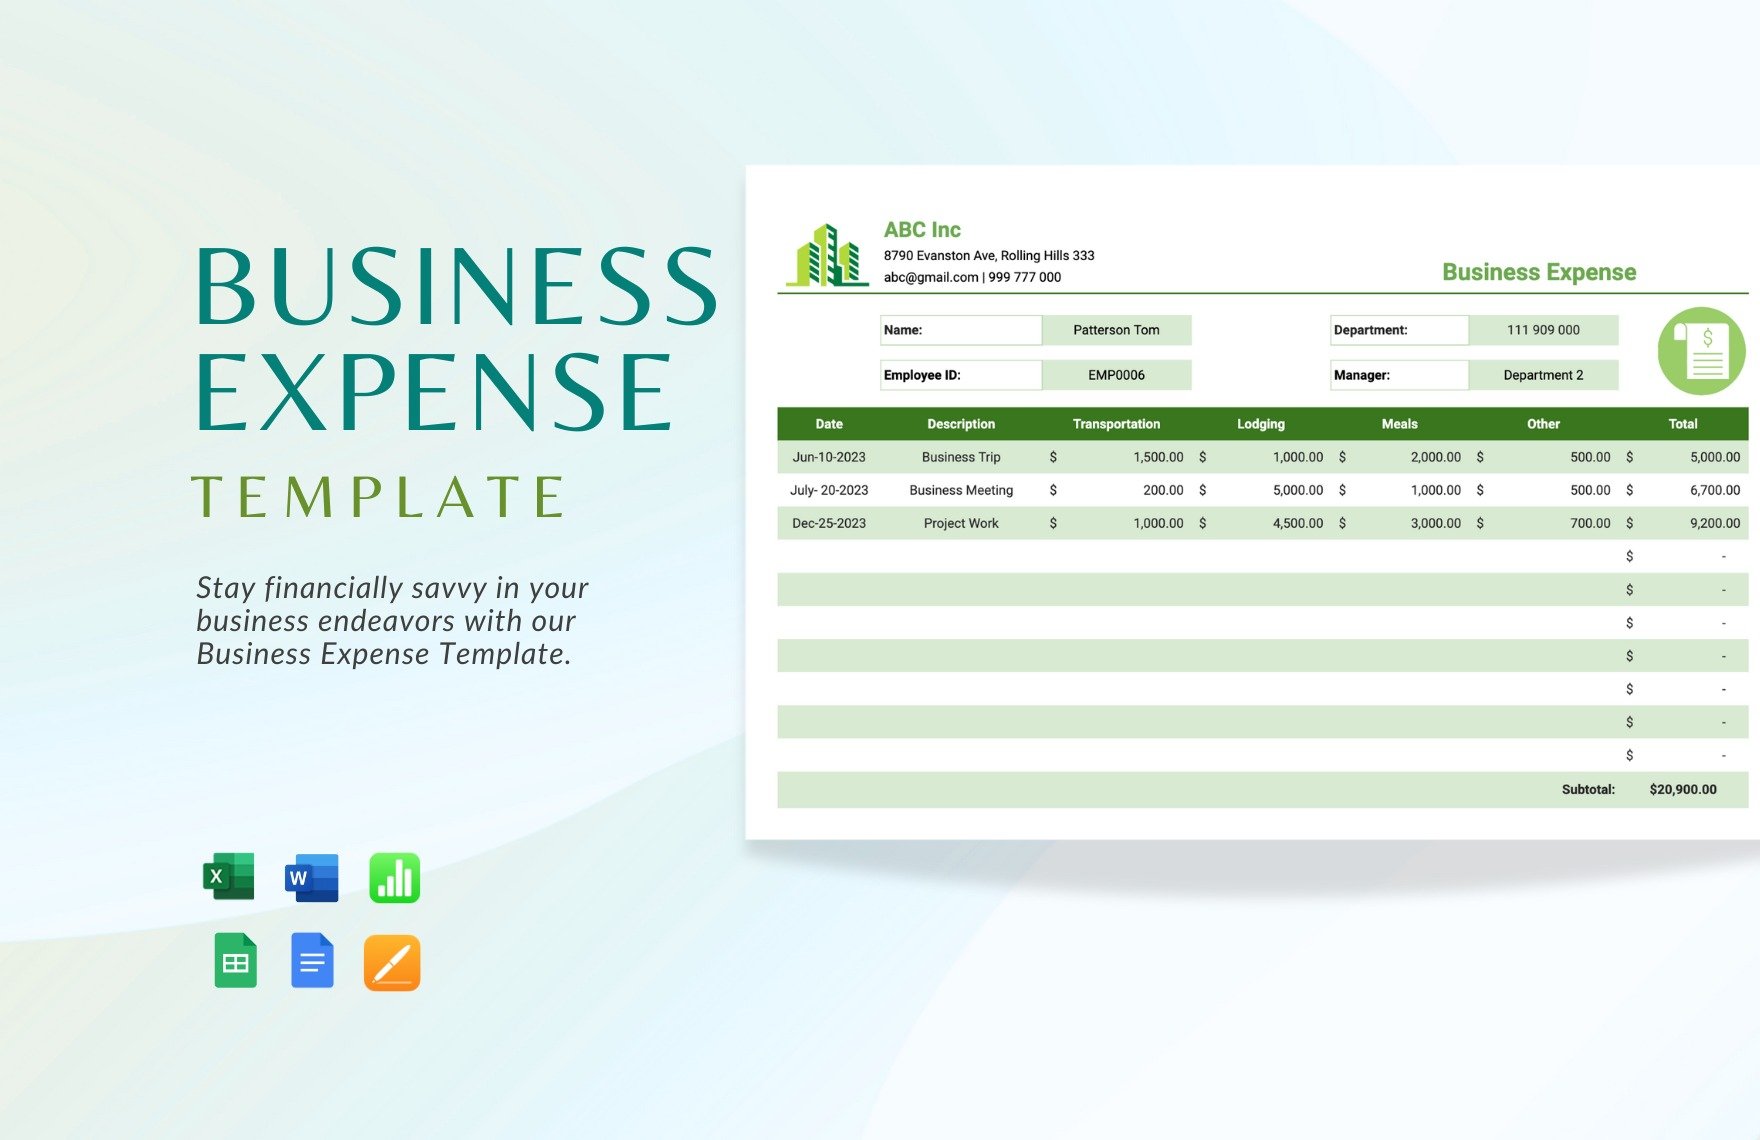 Business Expense Sheet Template in Word, Google Docs, Excel, Google Sheets, Apple Pages, Apple Numbers